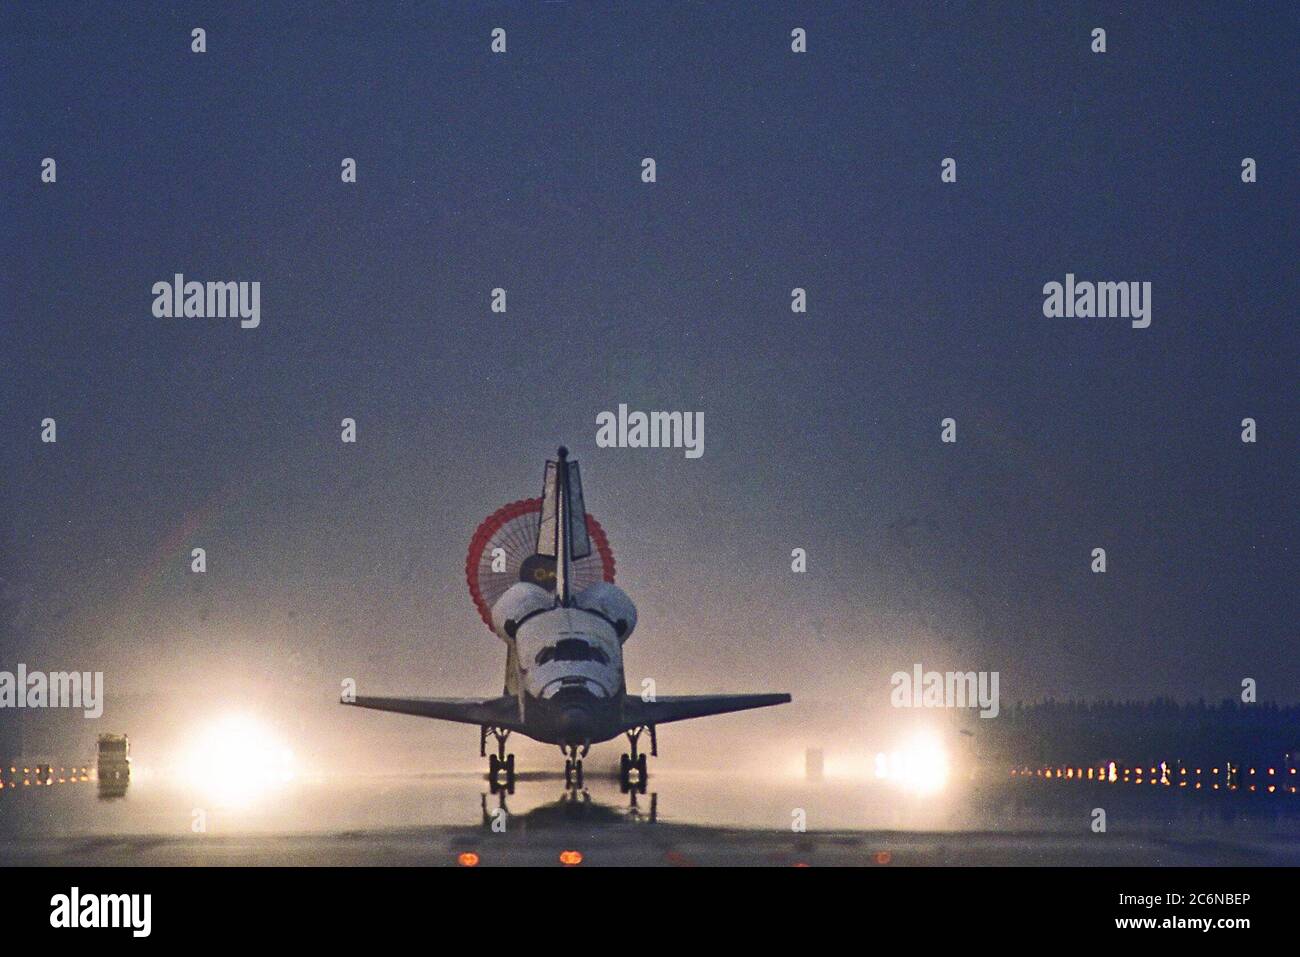 KENNEDY SPACE CENTER, FLA. -- With its drag chute deployed, the Space Shuttle  Orbiter Columbia touches down on Runway 33 at KSC’s Shuttle Landing Facility at  6:46:34 a.m. EDT  with Mission Commander  James D. Halsell Jr. and Pilot Susan L.  Still at the controls to complete the STS-94 mission. Also on board are Mission Specialist  Donald A. Thomas, Mission Specialist Michael L. Gernhardt , Payload Commander  Janice Voss, and Payload Specialists Roger  K.  Crouch and Gregory T. Linteris. Mission  elapsed time for STS-94 was 15 days,16 hours, 44 seconds. Stock Photo